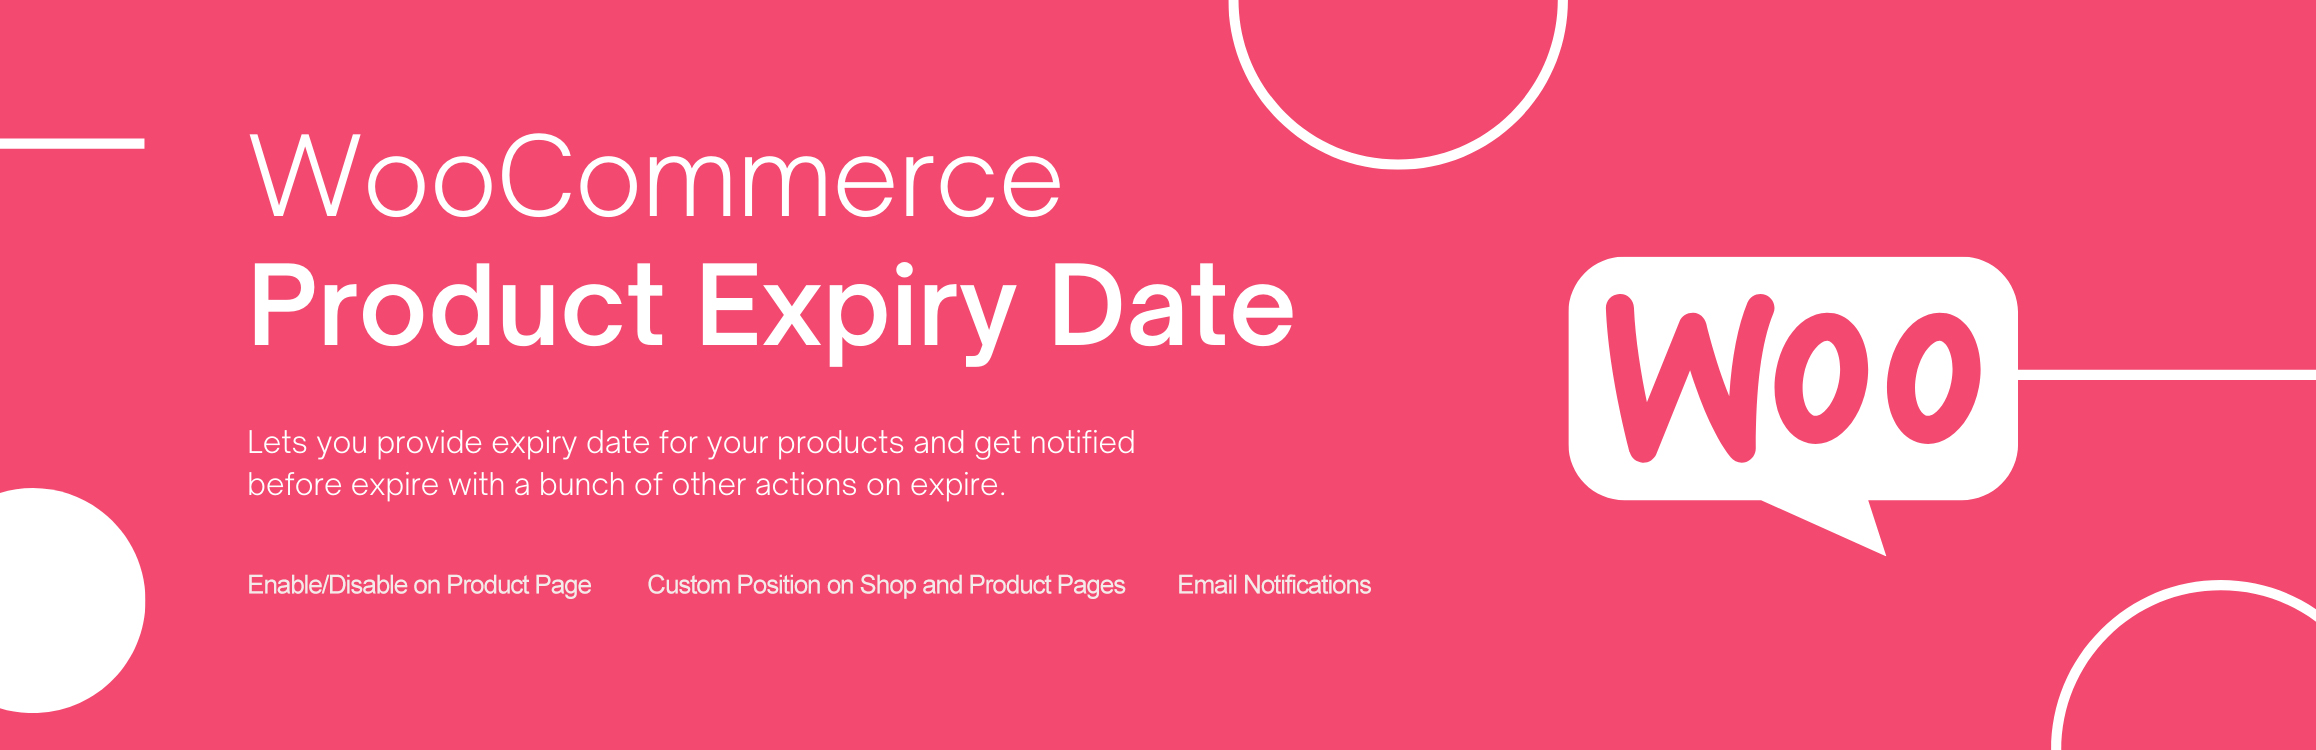 Product Expiry for WooCommerce